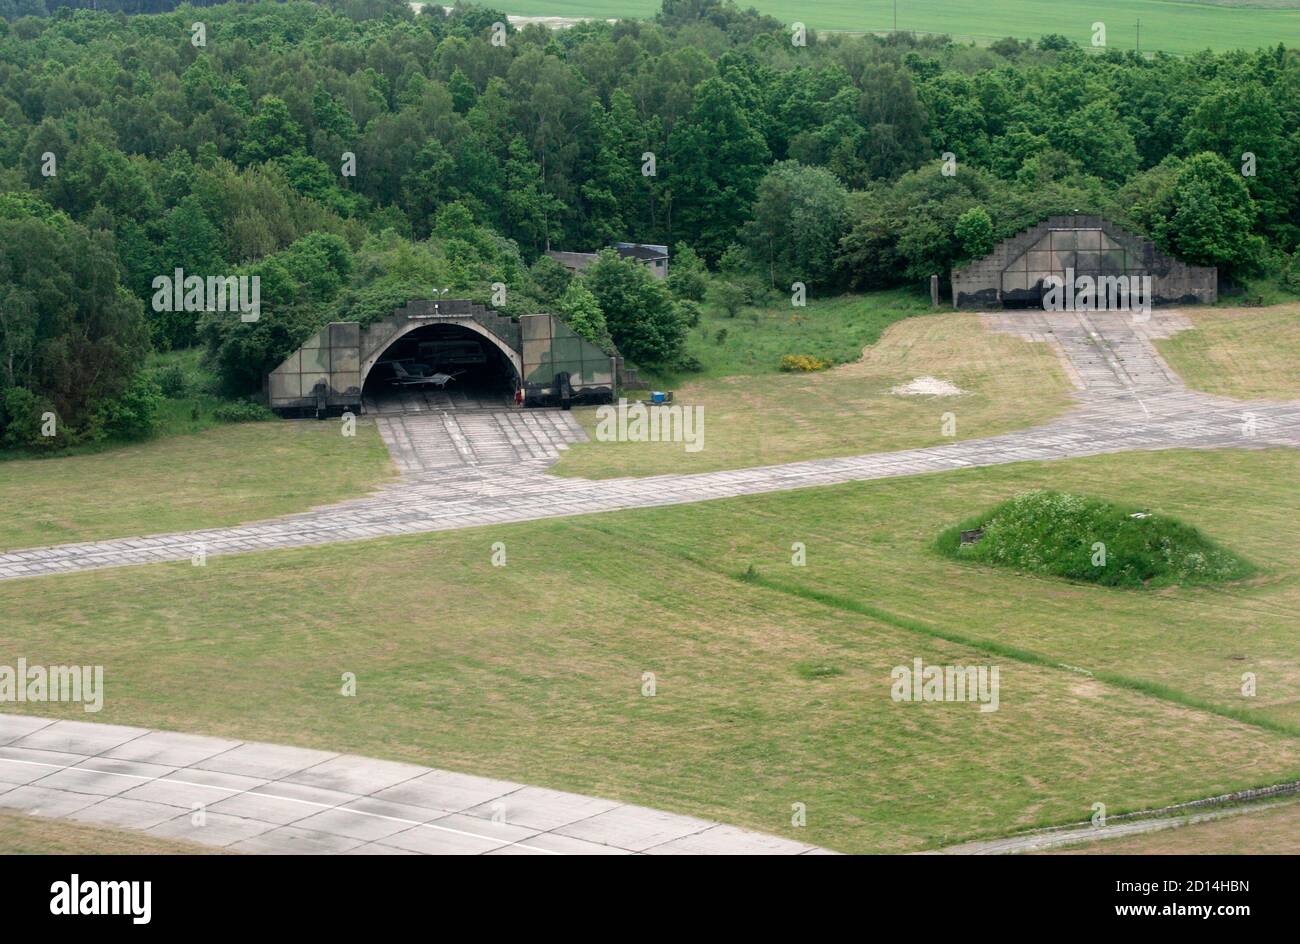 Aerial view of ex-military hangers at an airfield in Redzikowo, near Slupsk, northern Poland, May 27, 2007.The future location of the U.S. anti-missile shield in Poland is still an official secret but in the northern city of Slupsk the locals already know they may live next to it. The facility, which has caused controversy in Europe and anger in Moscow, is a hot topic in Slupsk and nearby Redzikowo, an ex-military airfield poised to house the rocket silos and about 200 U.S. military personnel.   To match feature SHIELD-POLAND/   REUTERS/Kacper Pempel (POLAND) Stock Photo